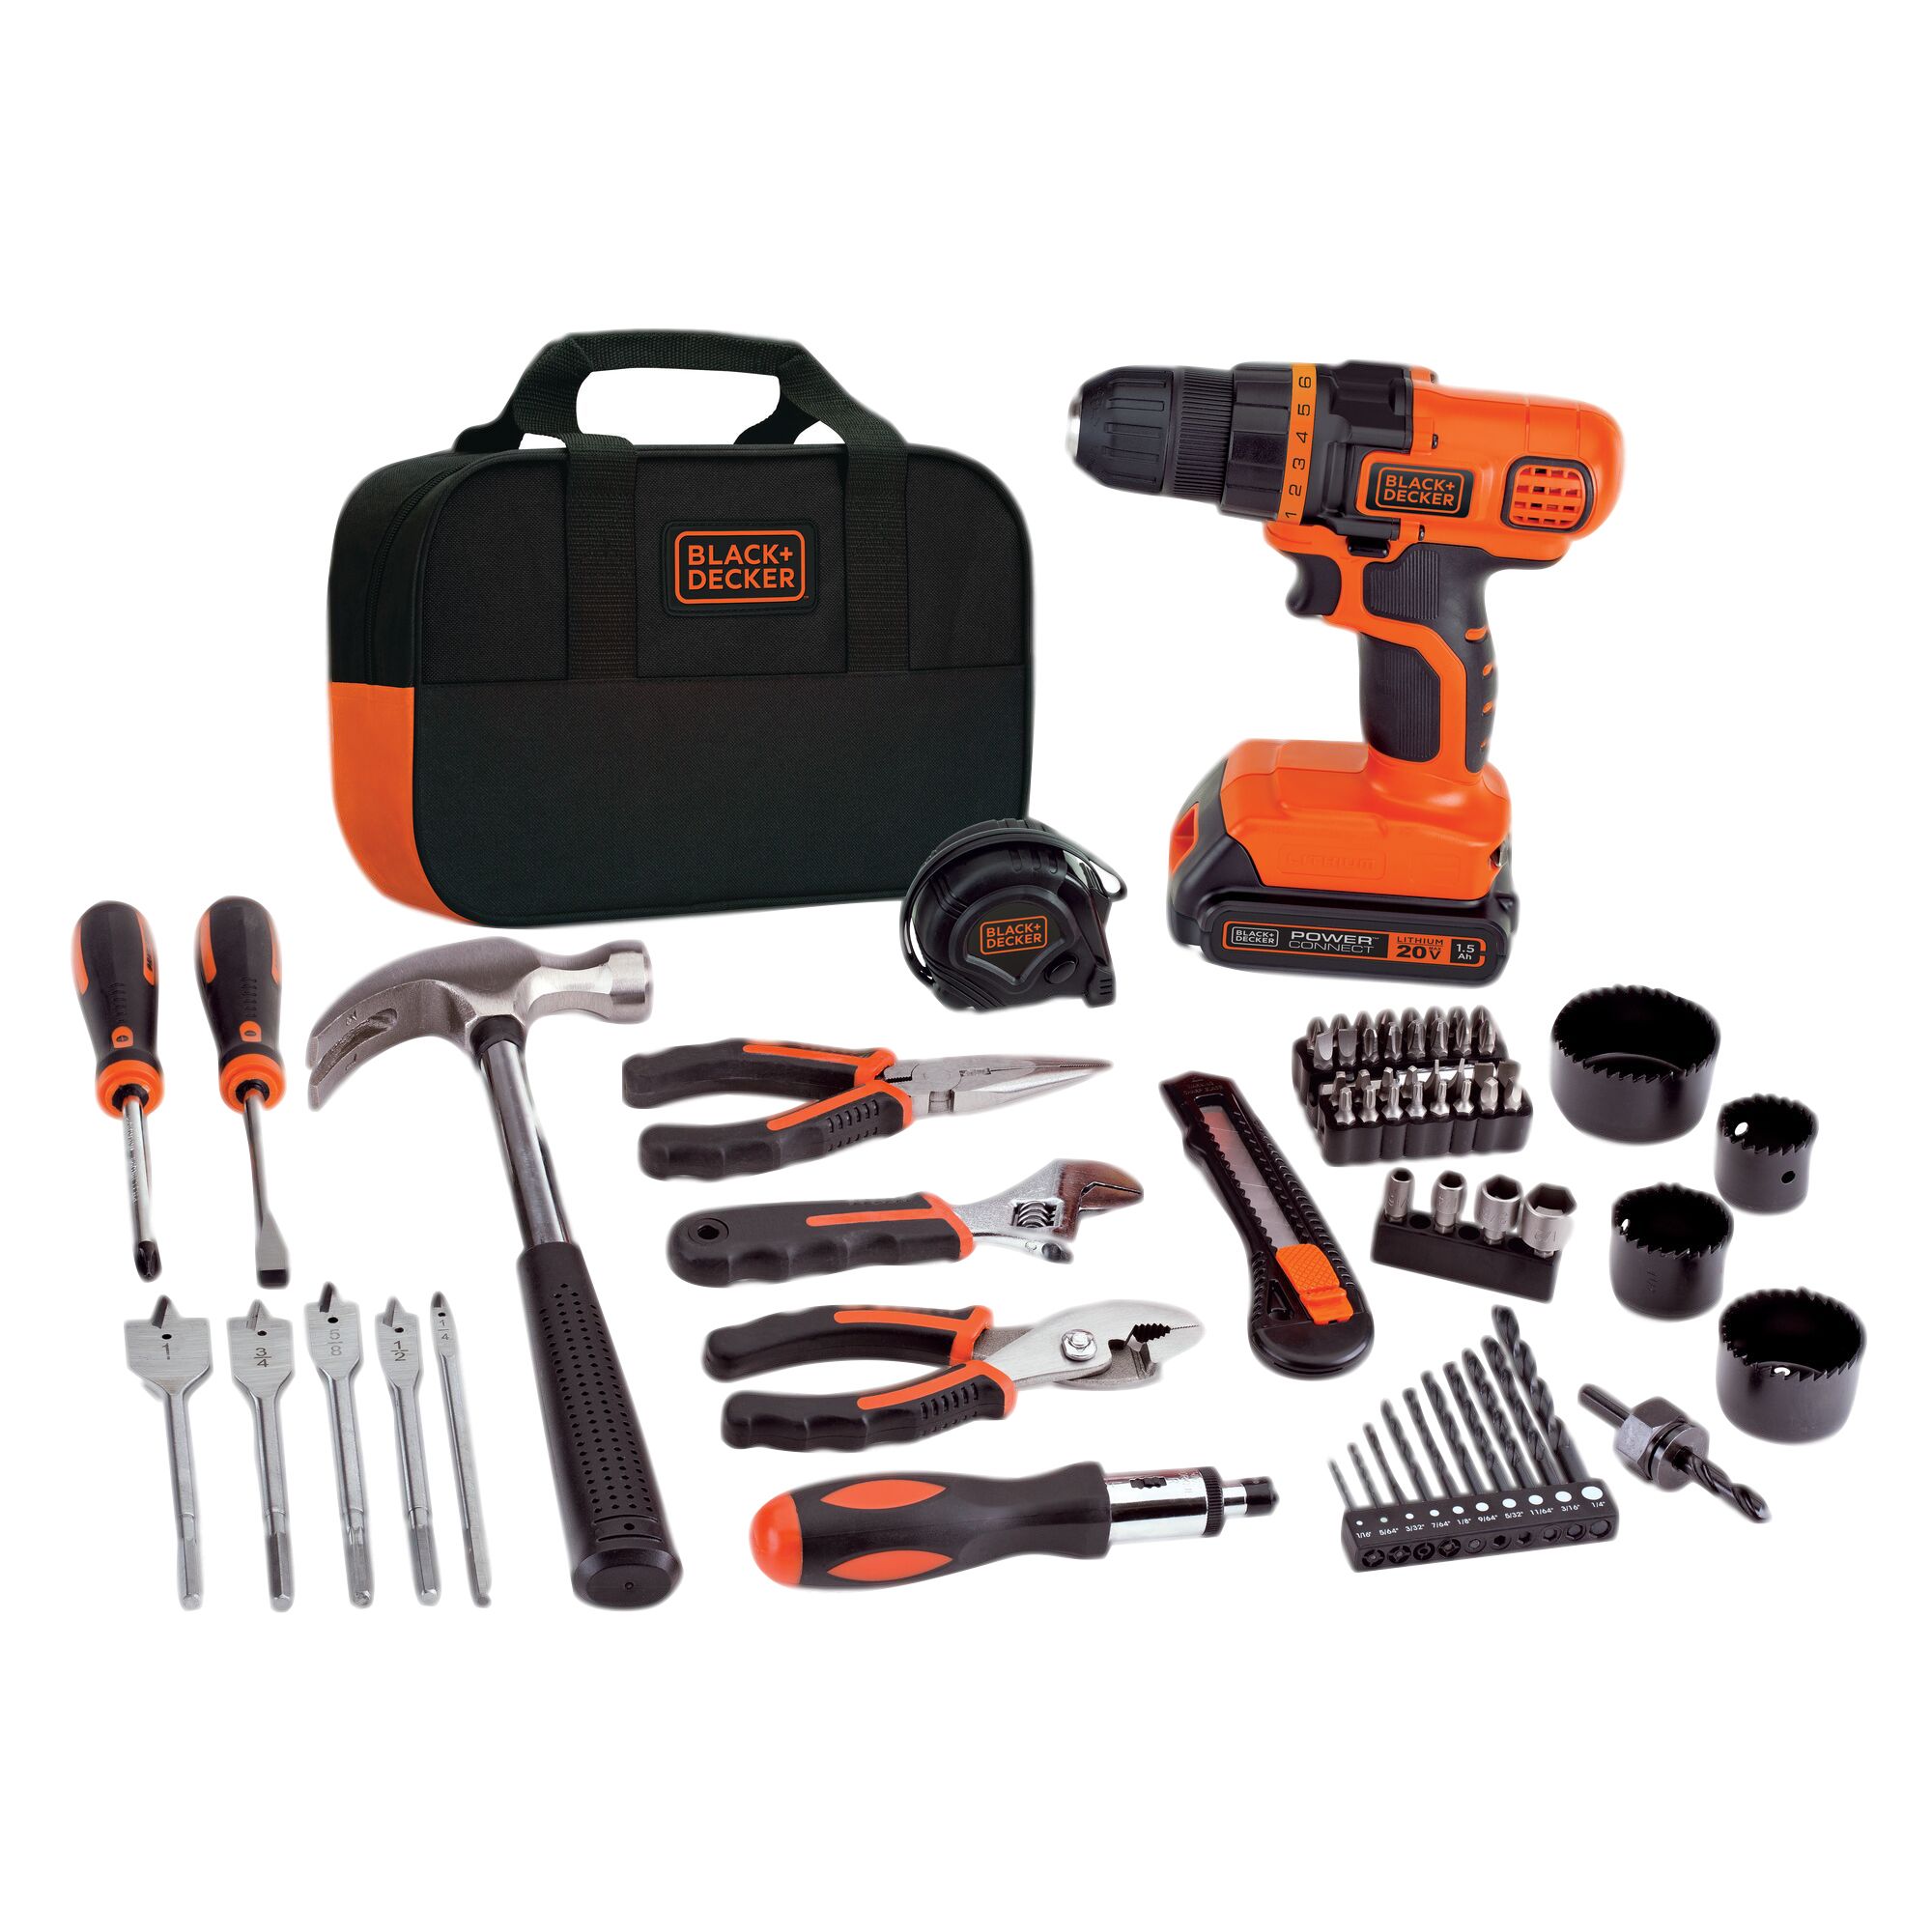 BLACK+DECKER Cordless Drill Combo Kit with Case, 6-Tool